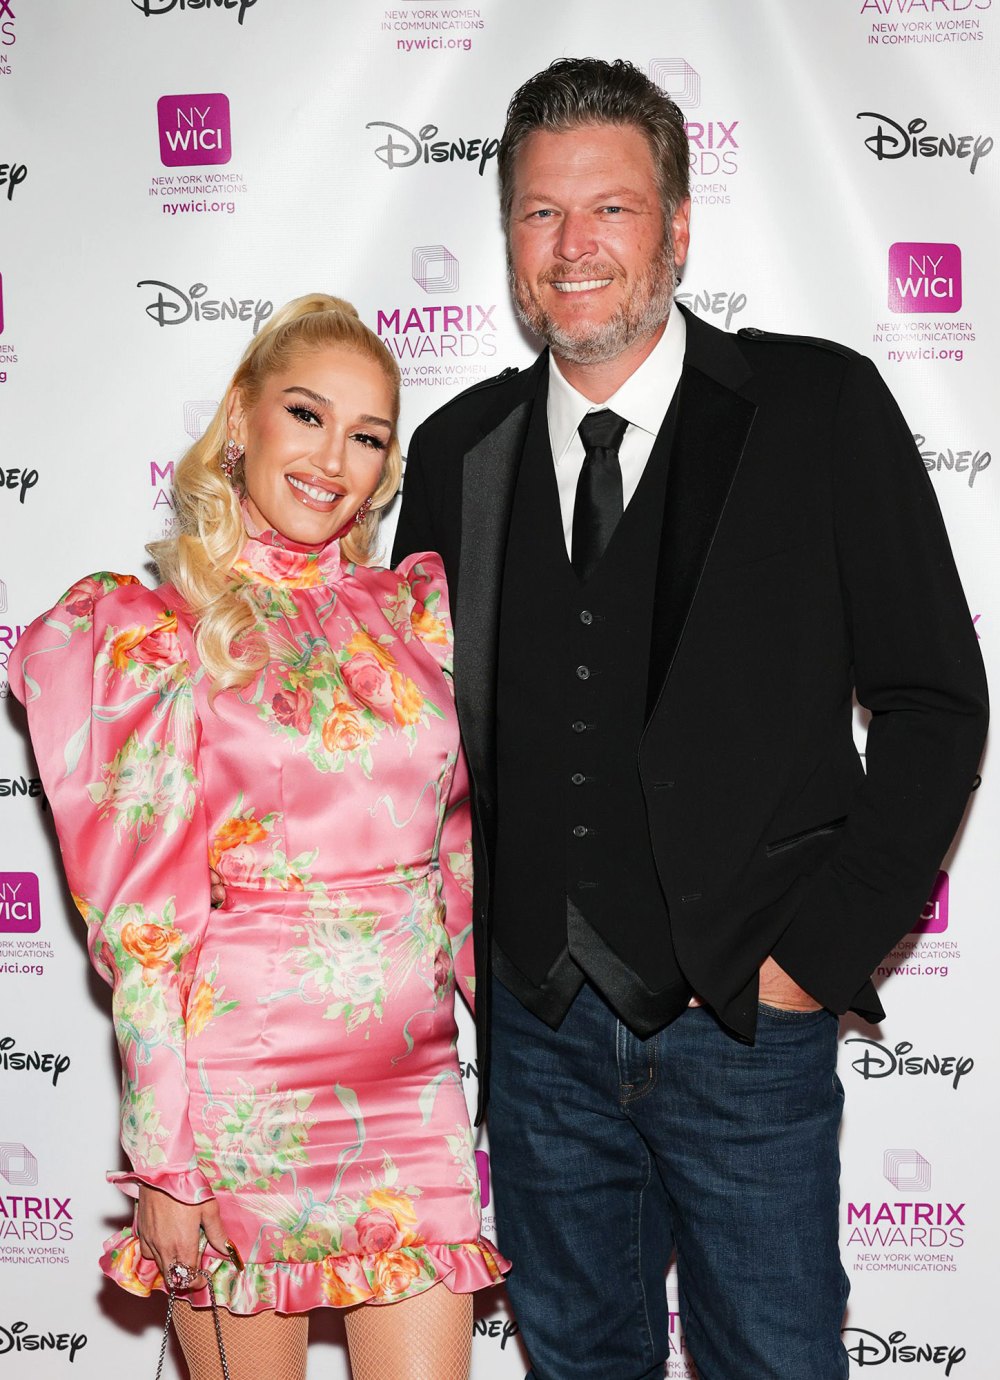 Blake Shelton Details Christmas Cooking Traditions With Gwen Stefani- 'We Always Challenge Ourselves' 317 NYWICI's Matrix Awards, Arrivals, New York, USA - 26 Oct 2022